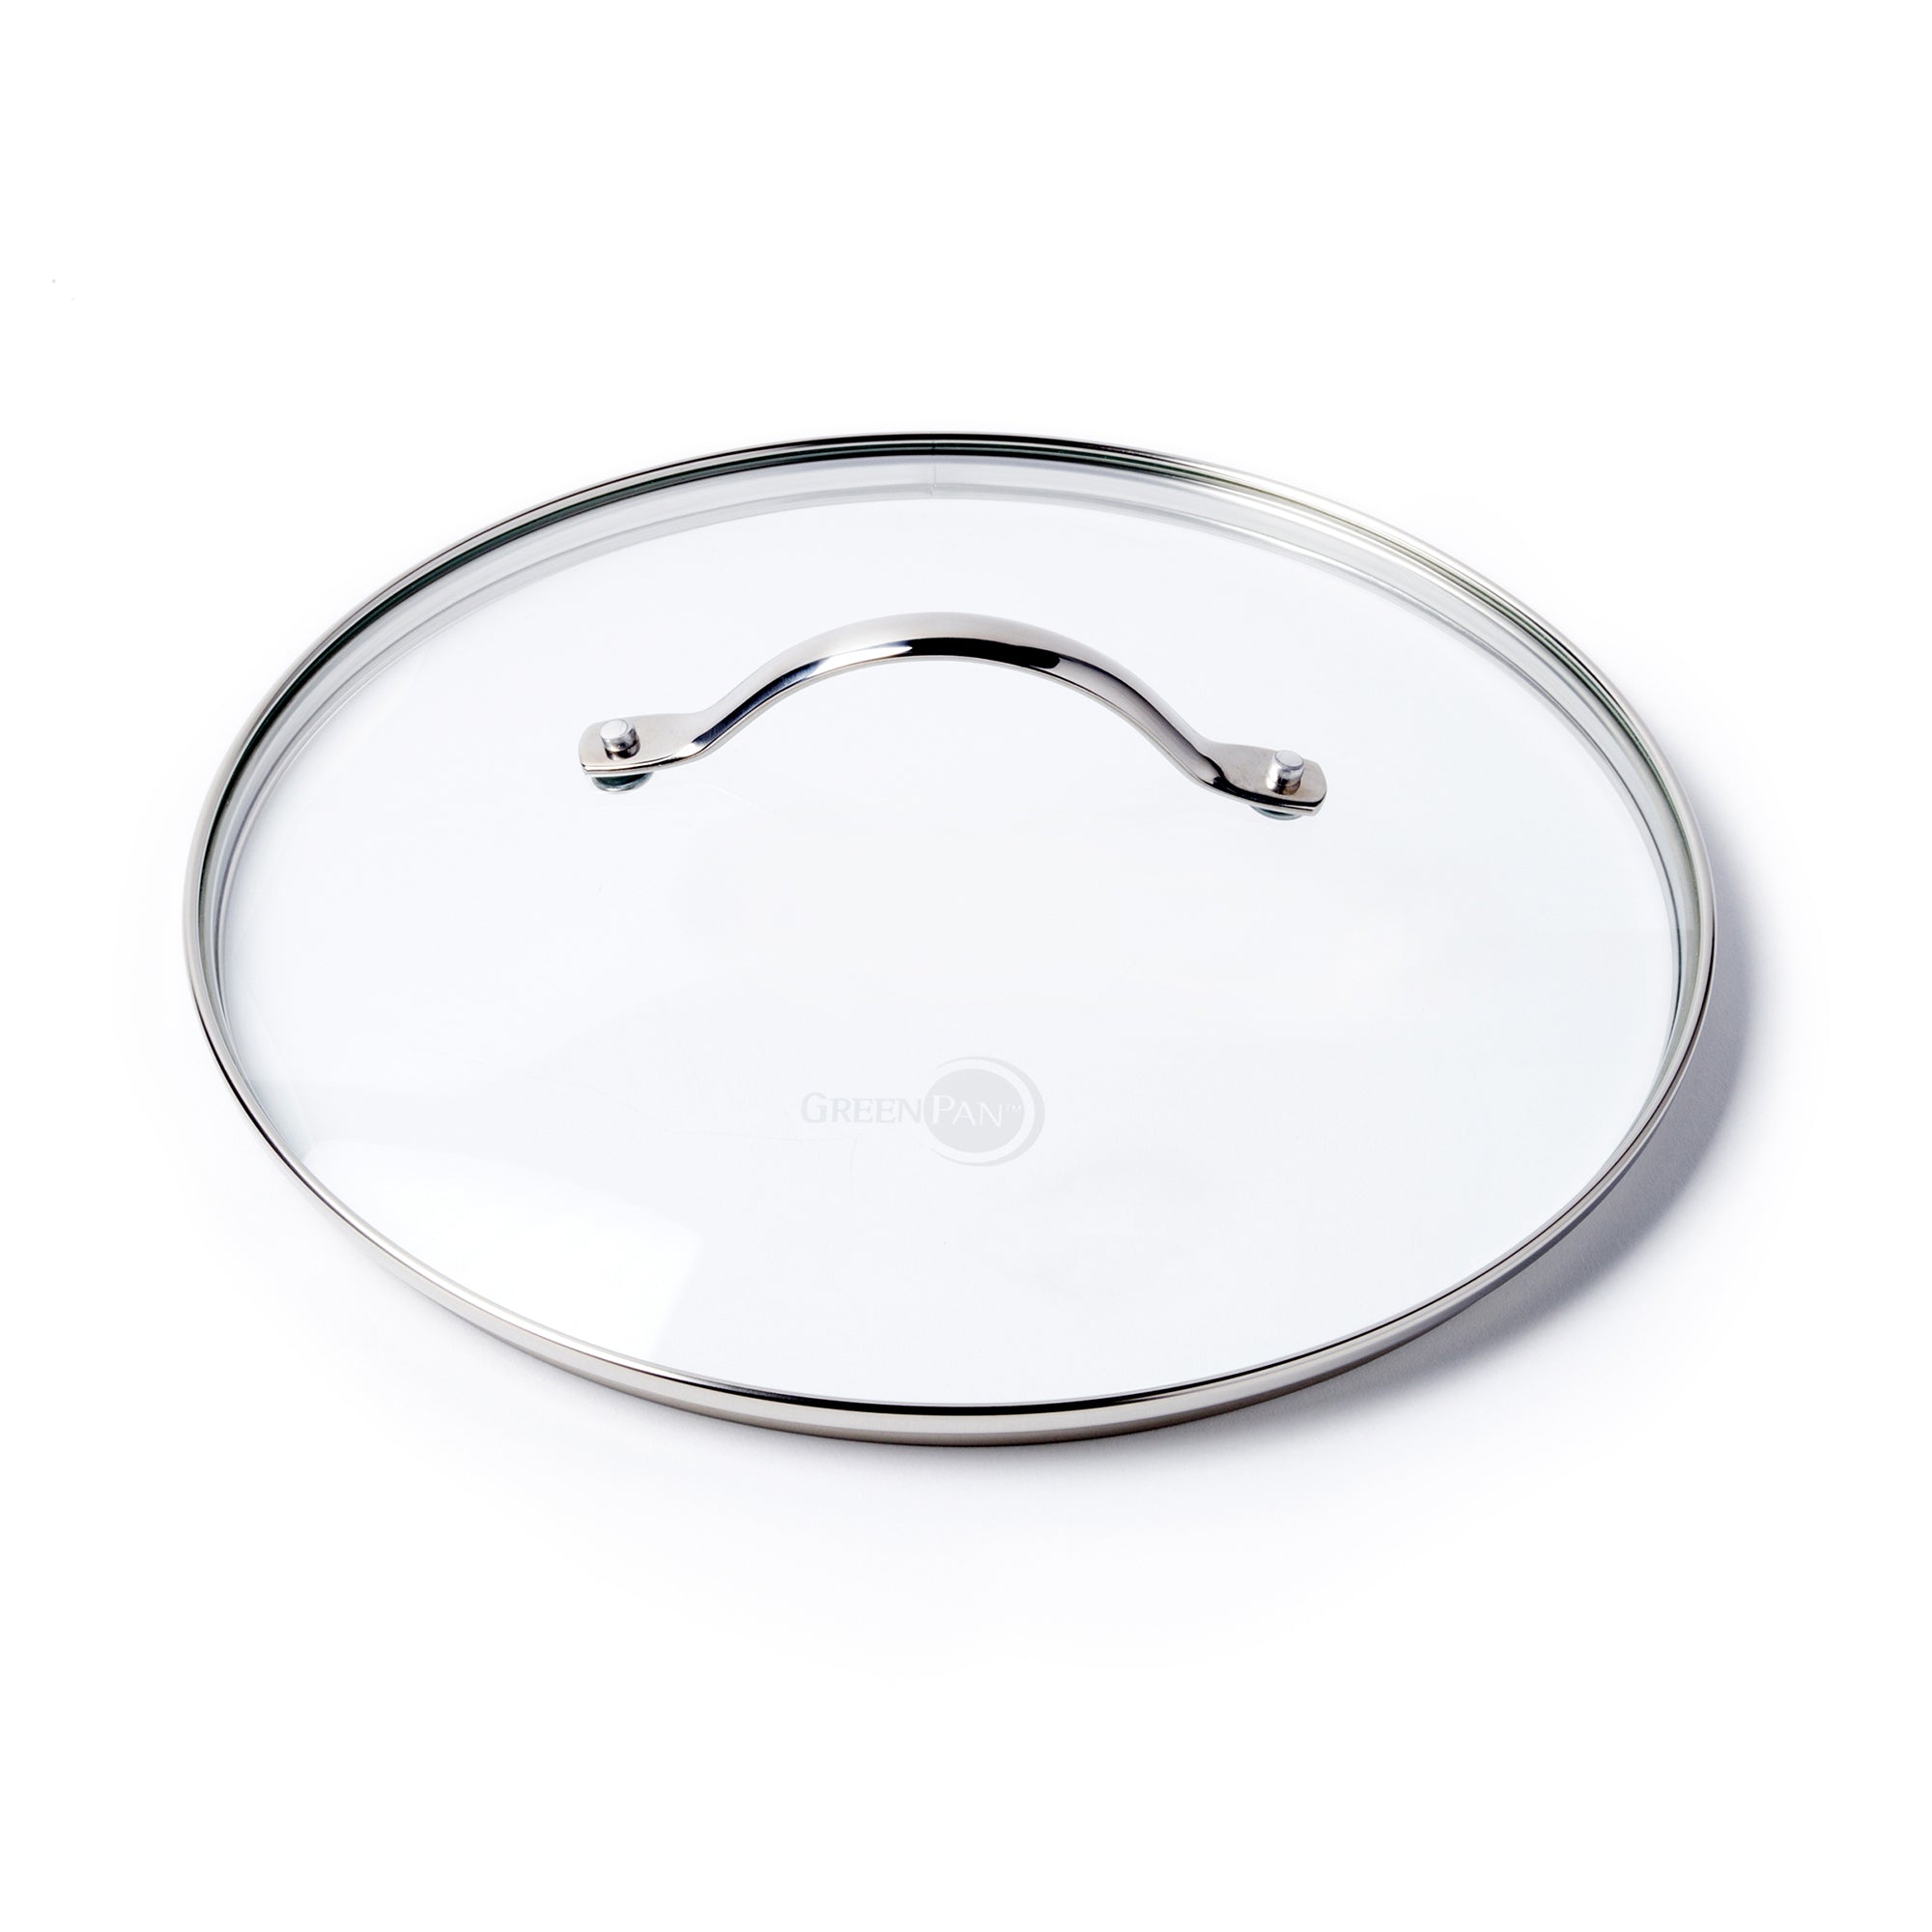 Universal Round Lid for Pans, Pots and Skillets, Rim Fits 10, 11